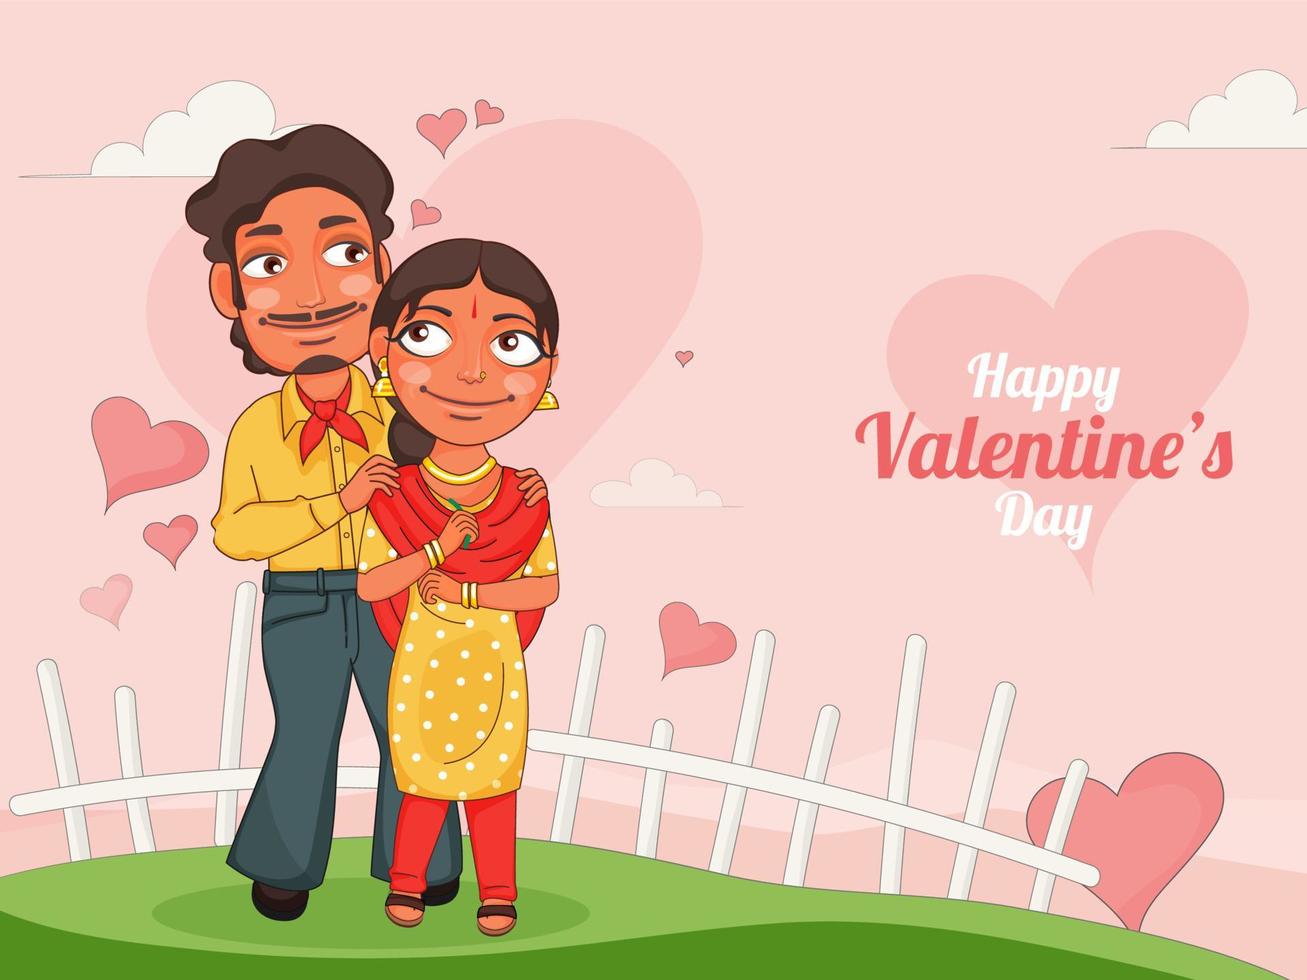 Young Couple Character Standing on Garden View with Pink Hearts Background for Happy Valentine's Day Celebration Concept. vector